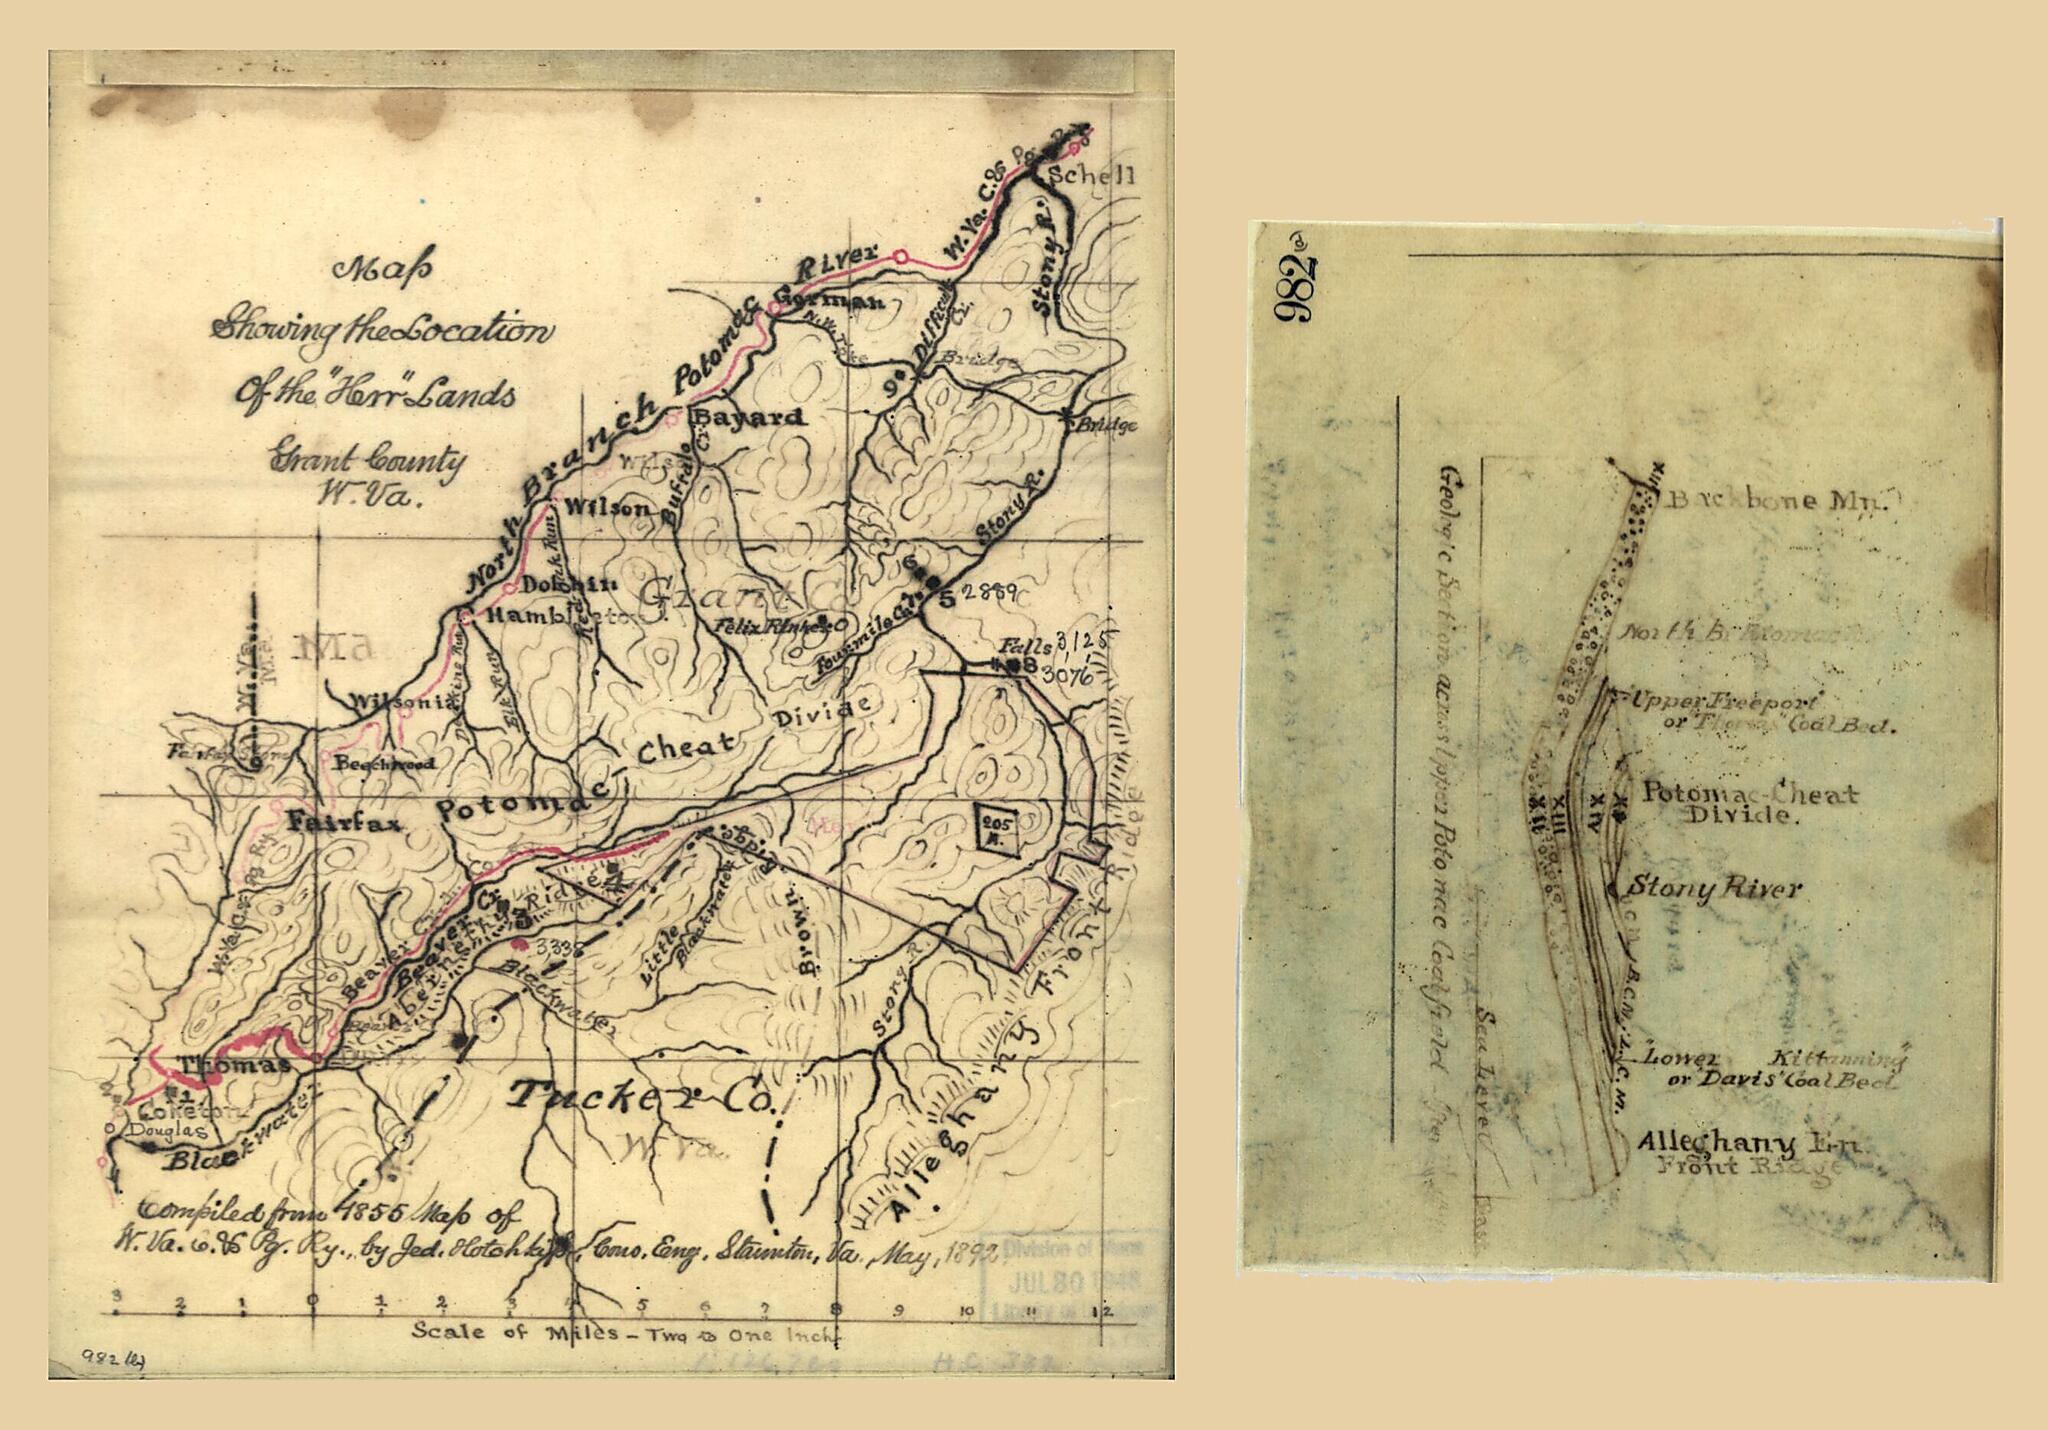 This old map of Map Showing the Location of the Herr Lands, Grant County, W. Va. (Map Showing the Location of the Kerr Coal &amp; Timber Lands, Grant County, W. Va) from 1892 was created by Jedediah Hotchkiss in 1892